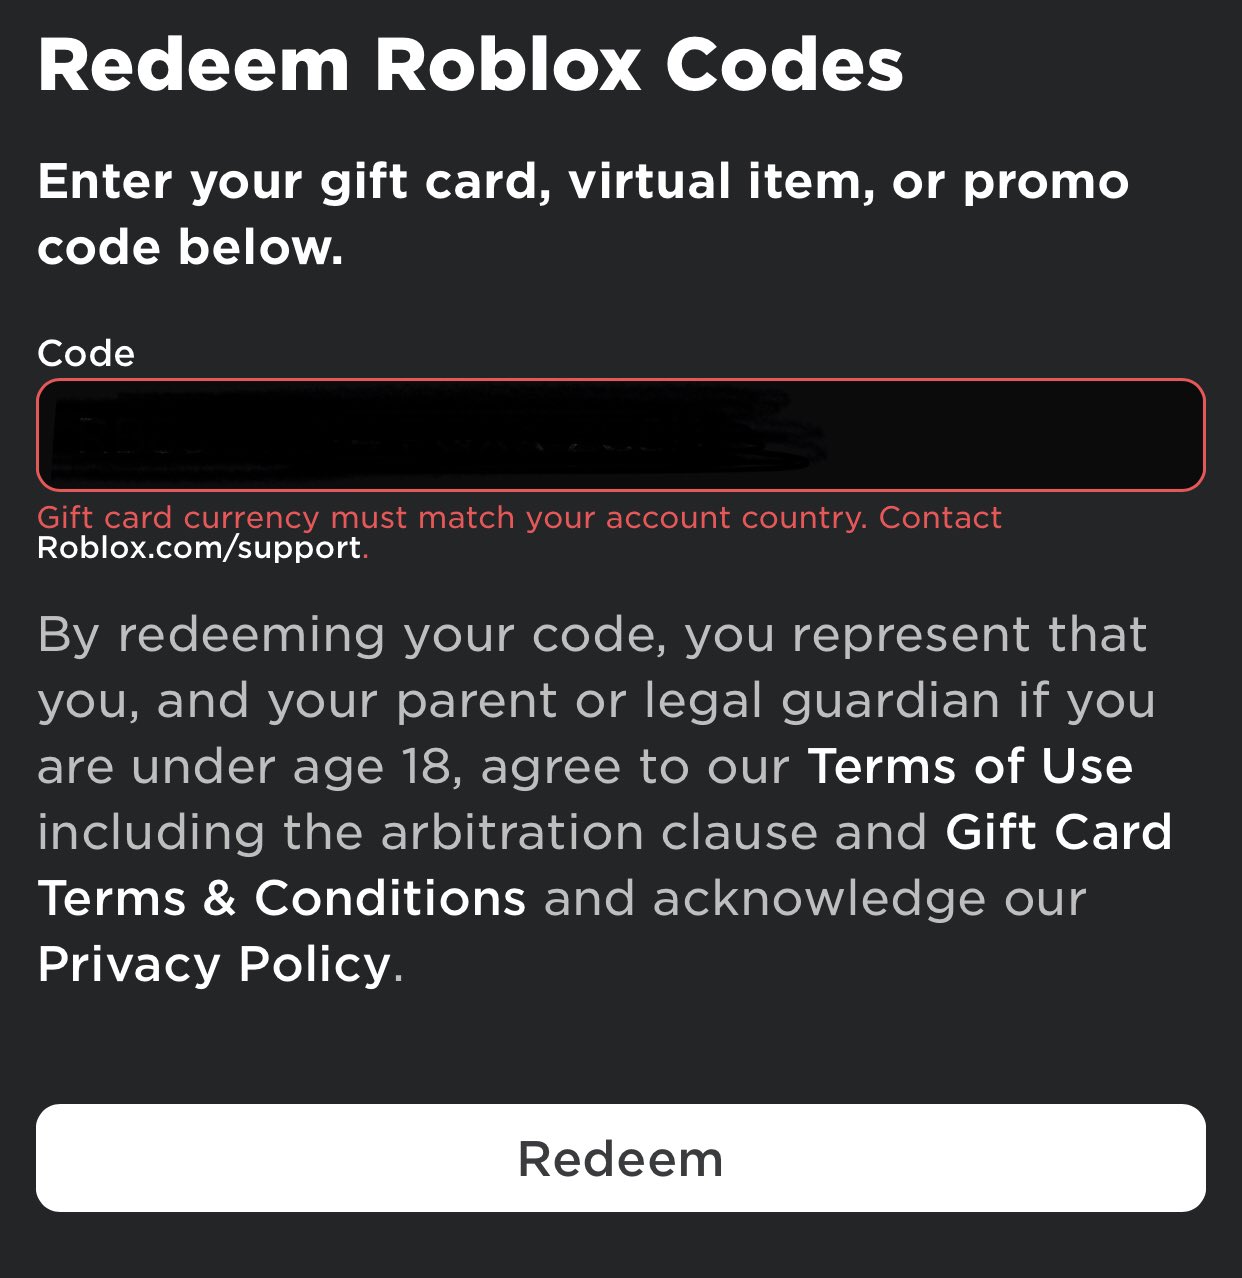 Giftcard currency must match your roblox account country bug｜TikTok Search